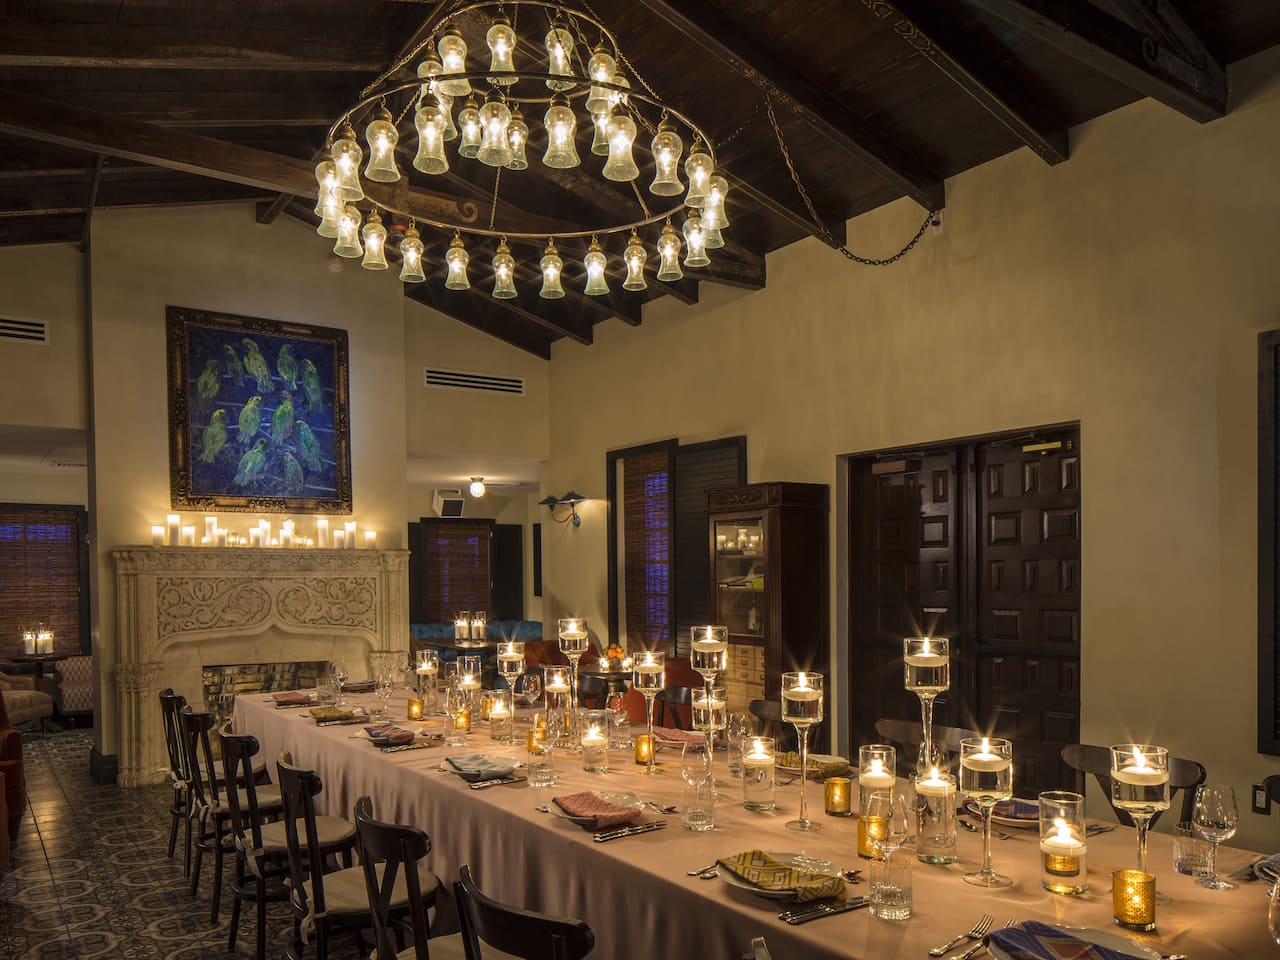 The 1930s House Dinner Reception